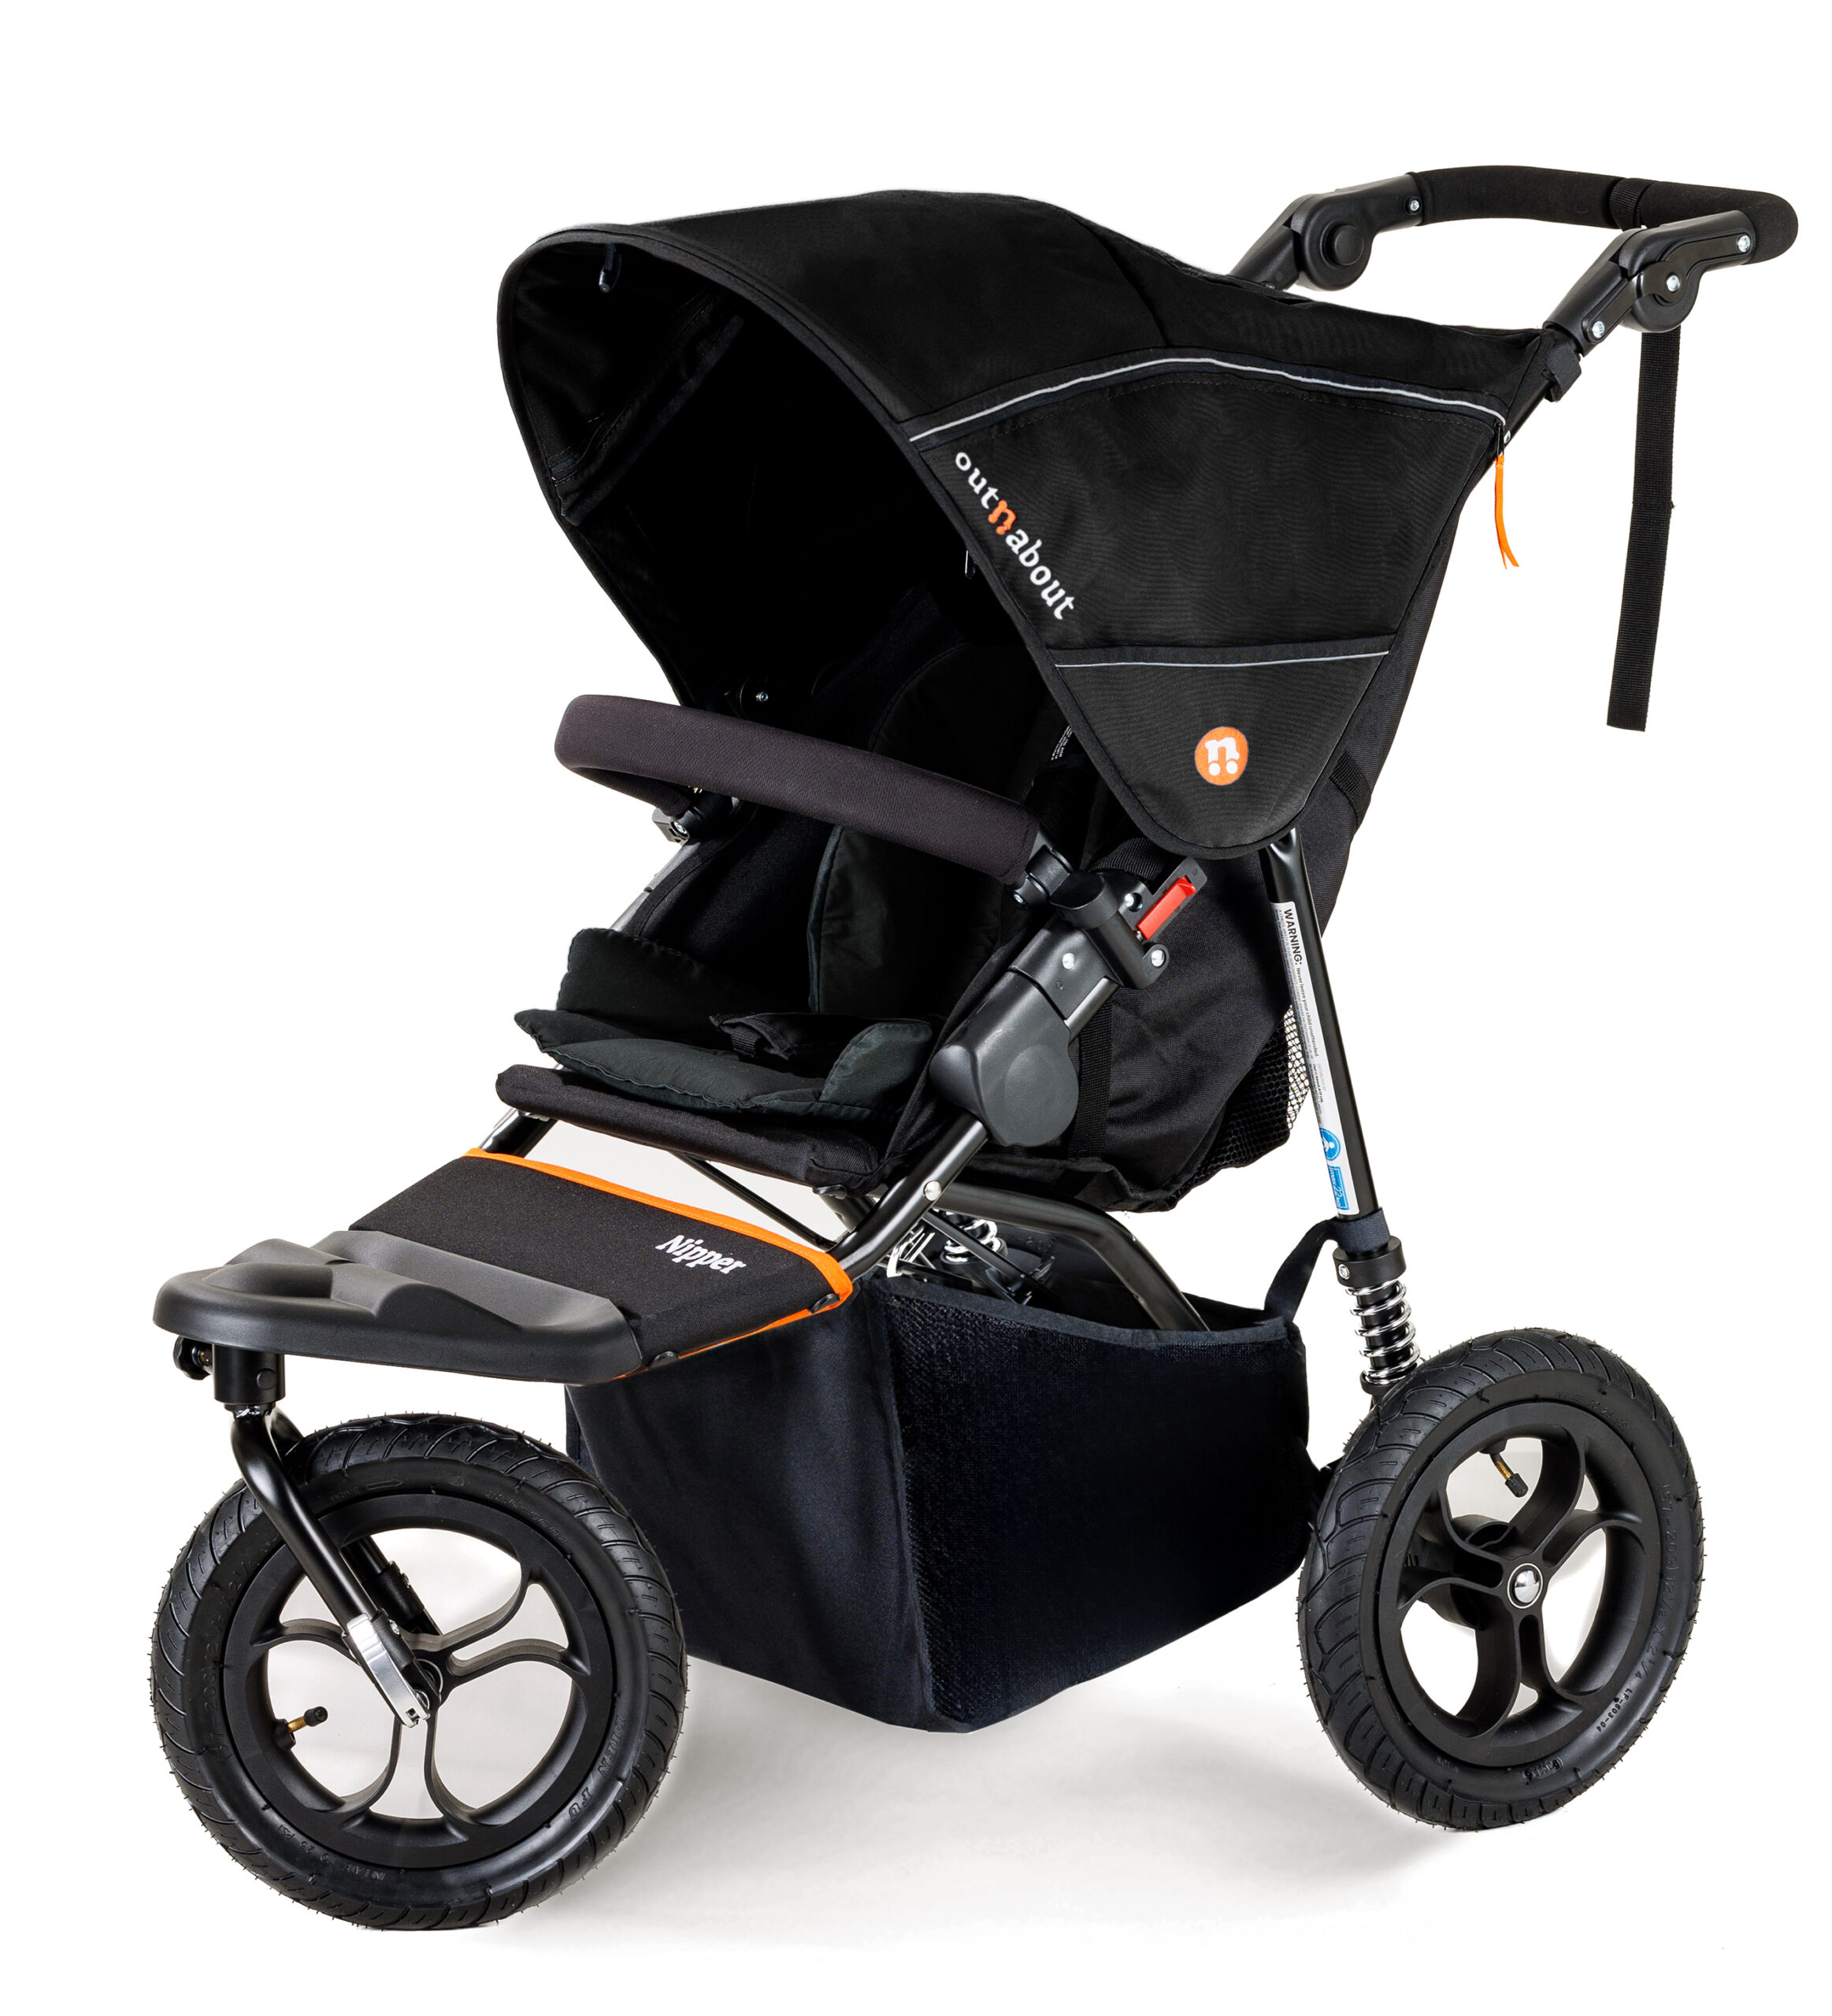 Out'n'About Nipper V5 Pushchair Summit black from Olivers Baby Care